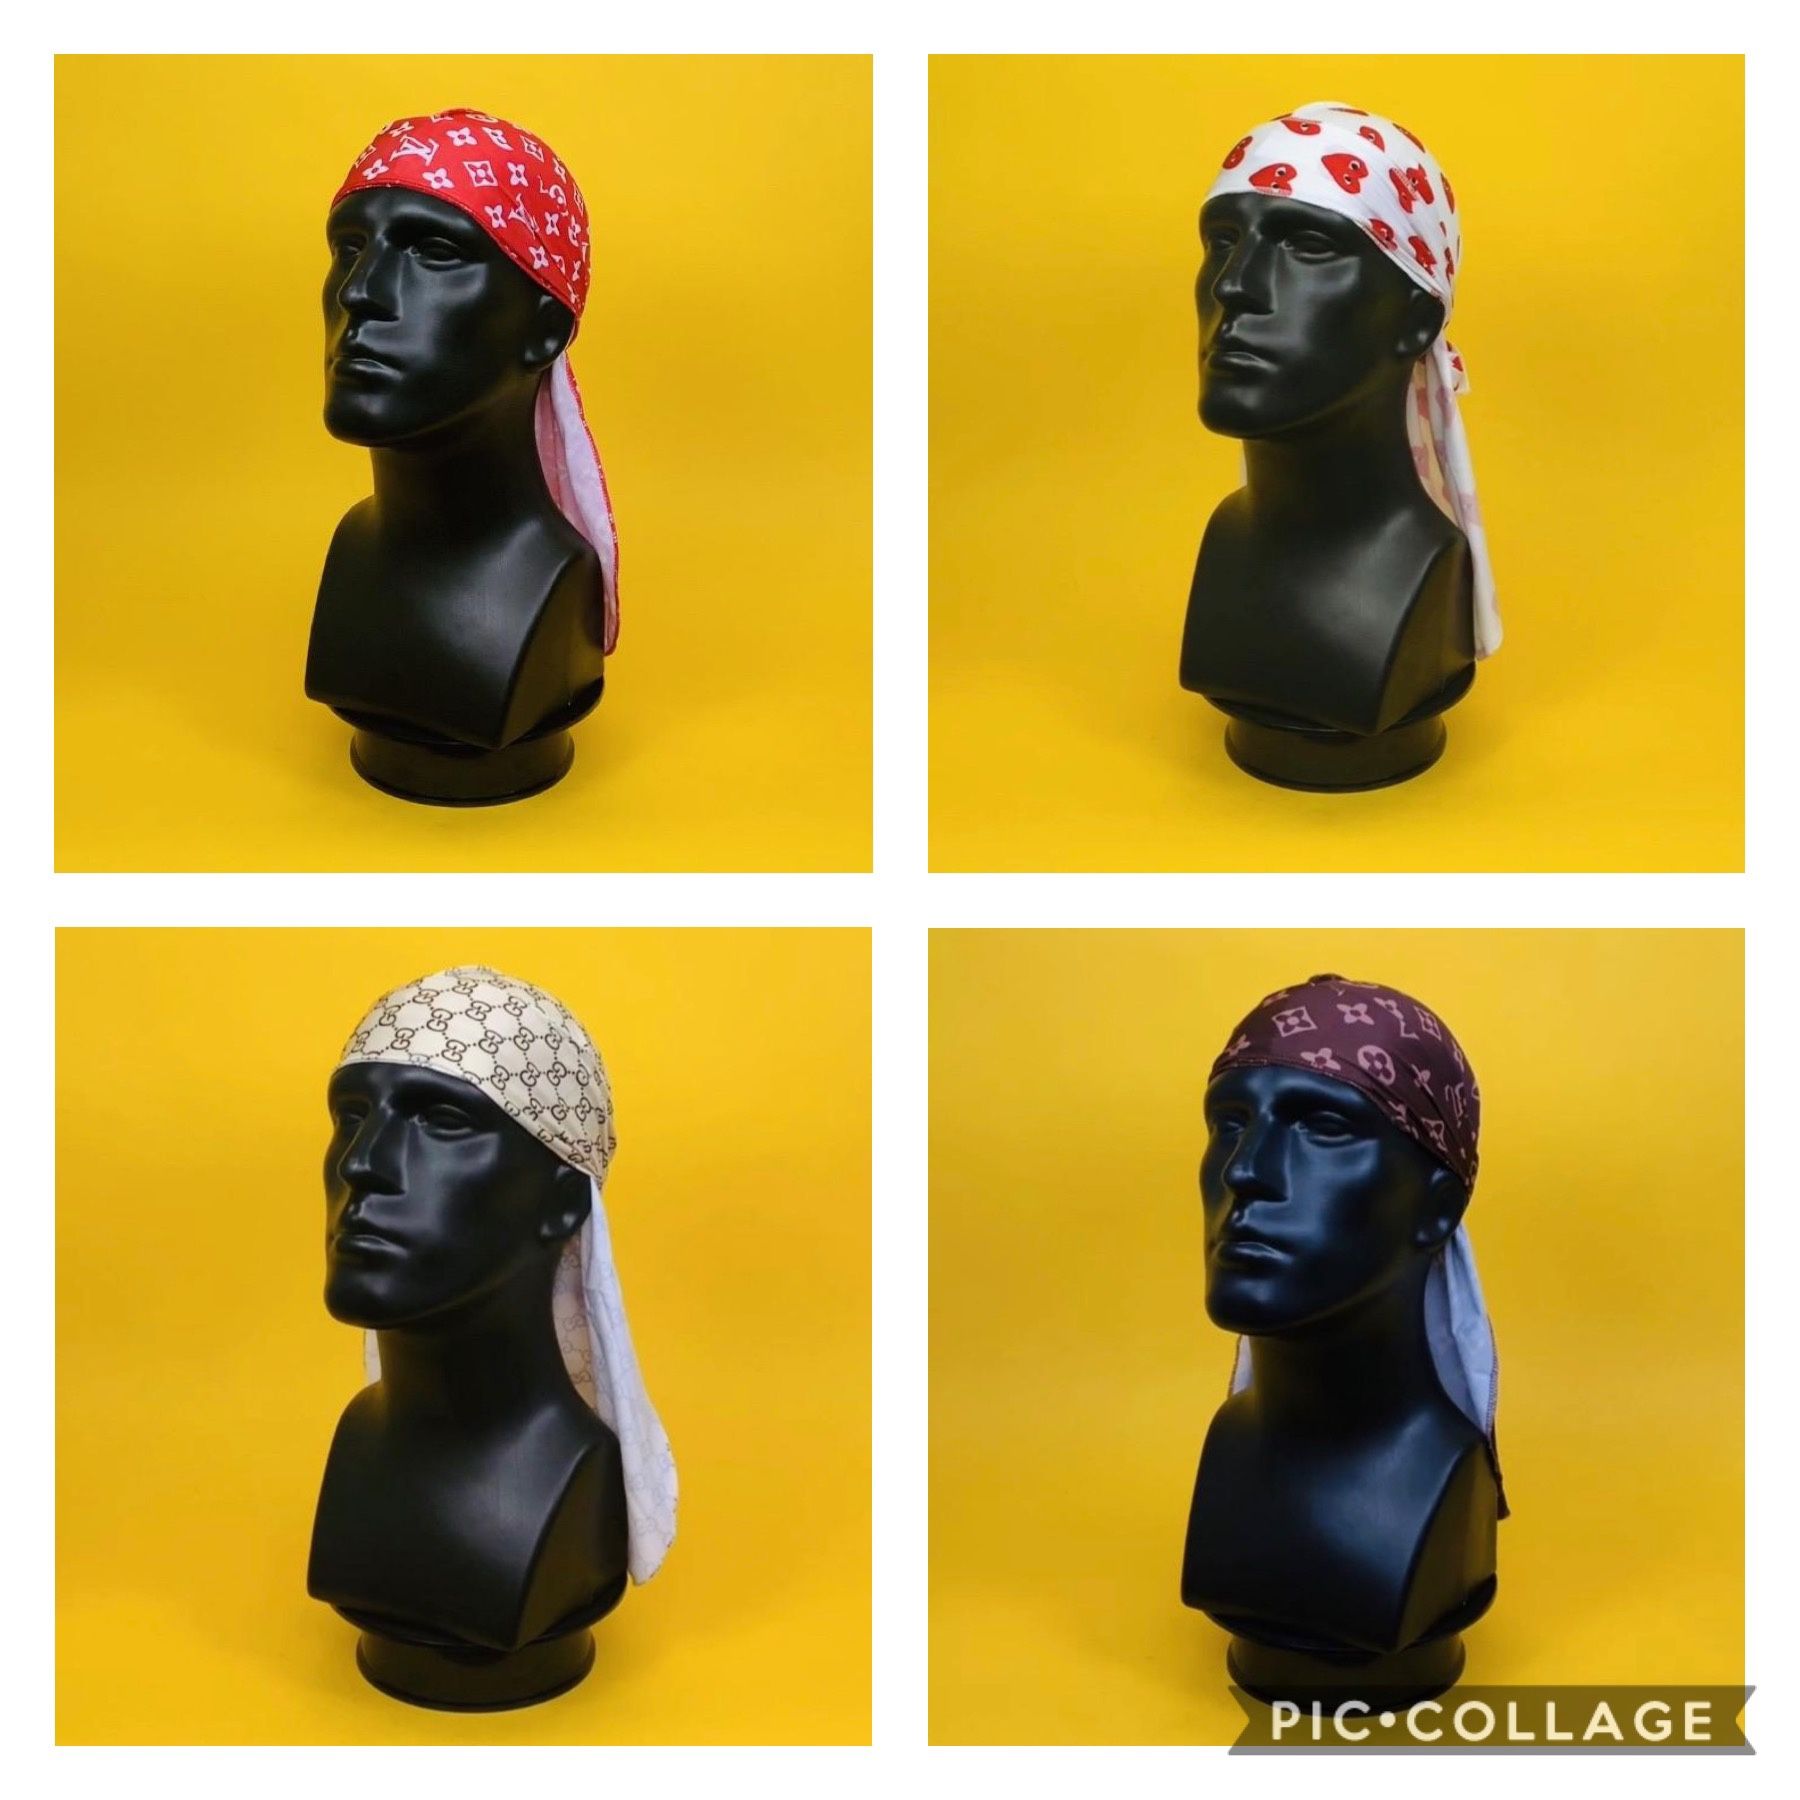 Designer Durags “Limited stock so order fast”